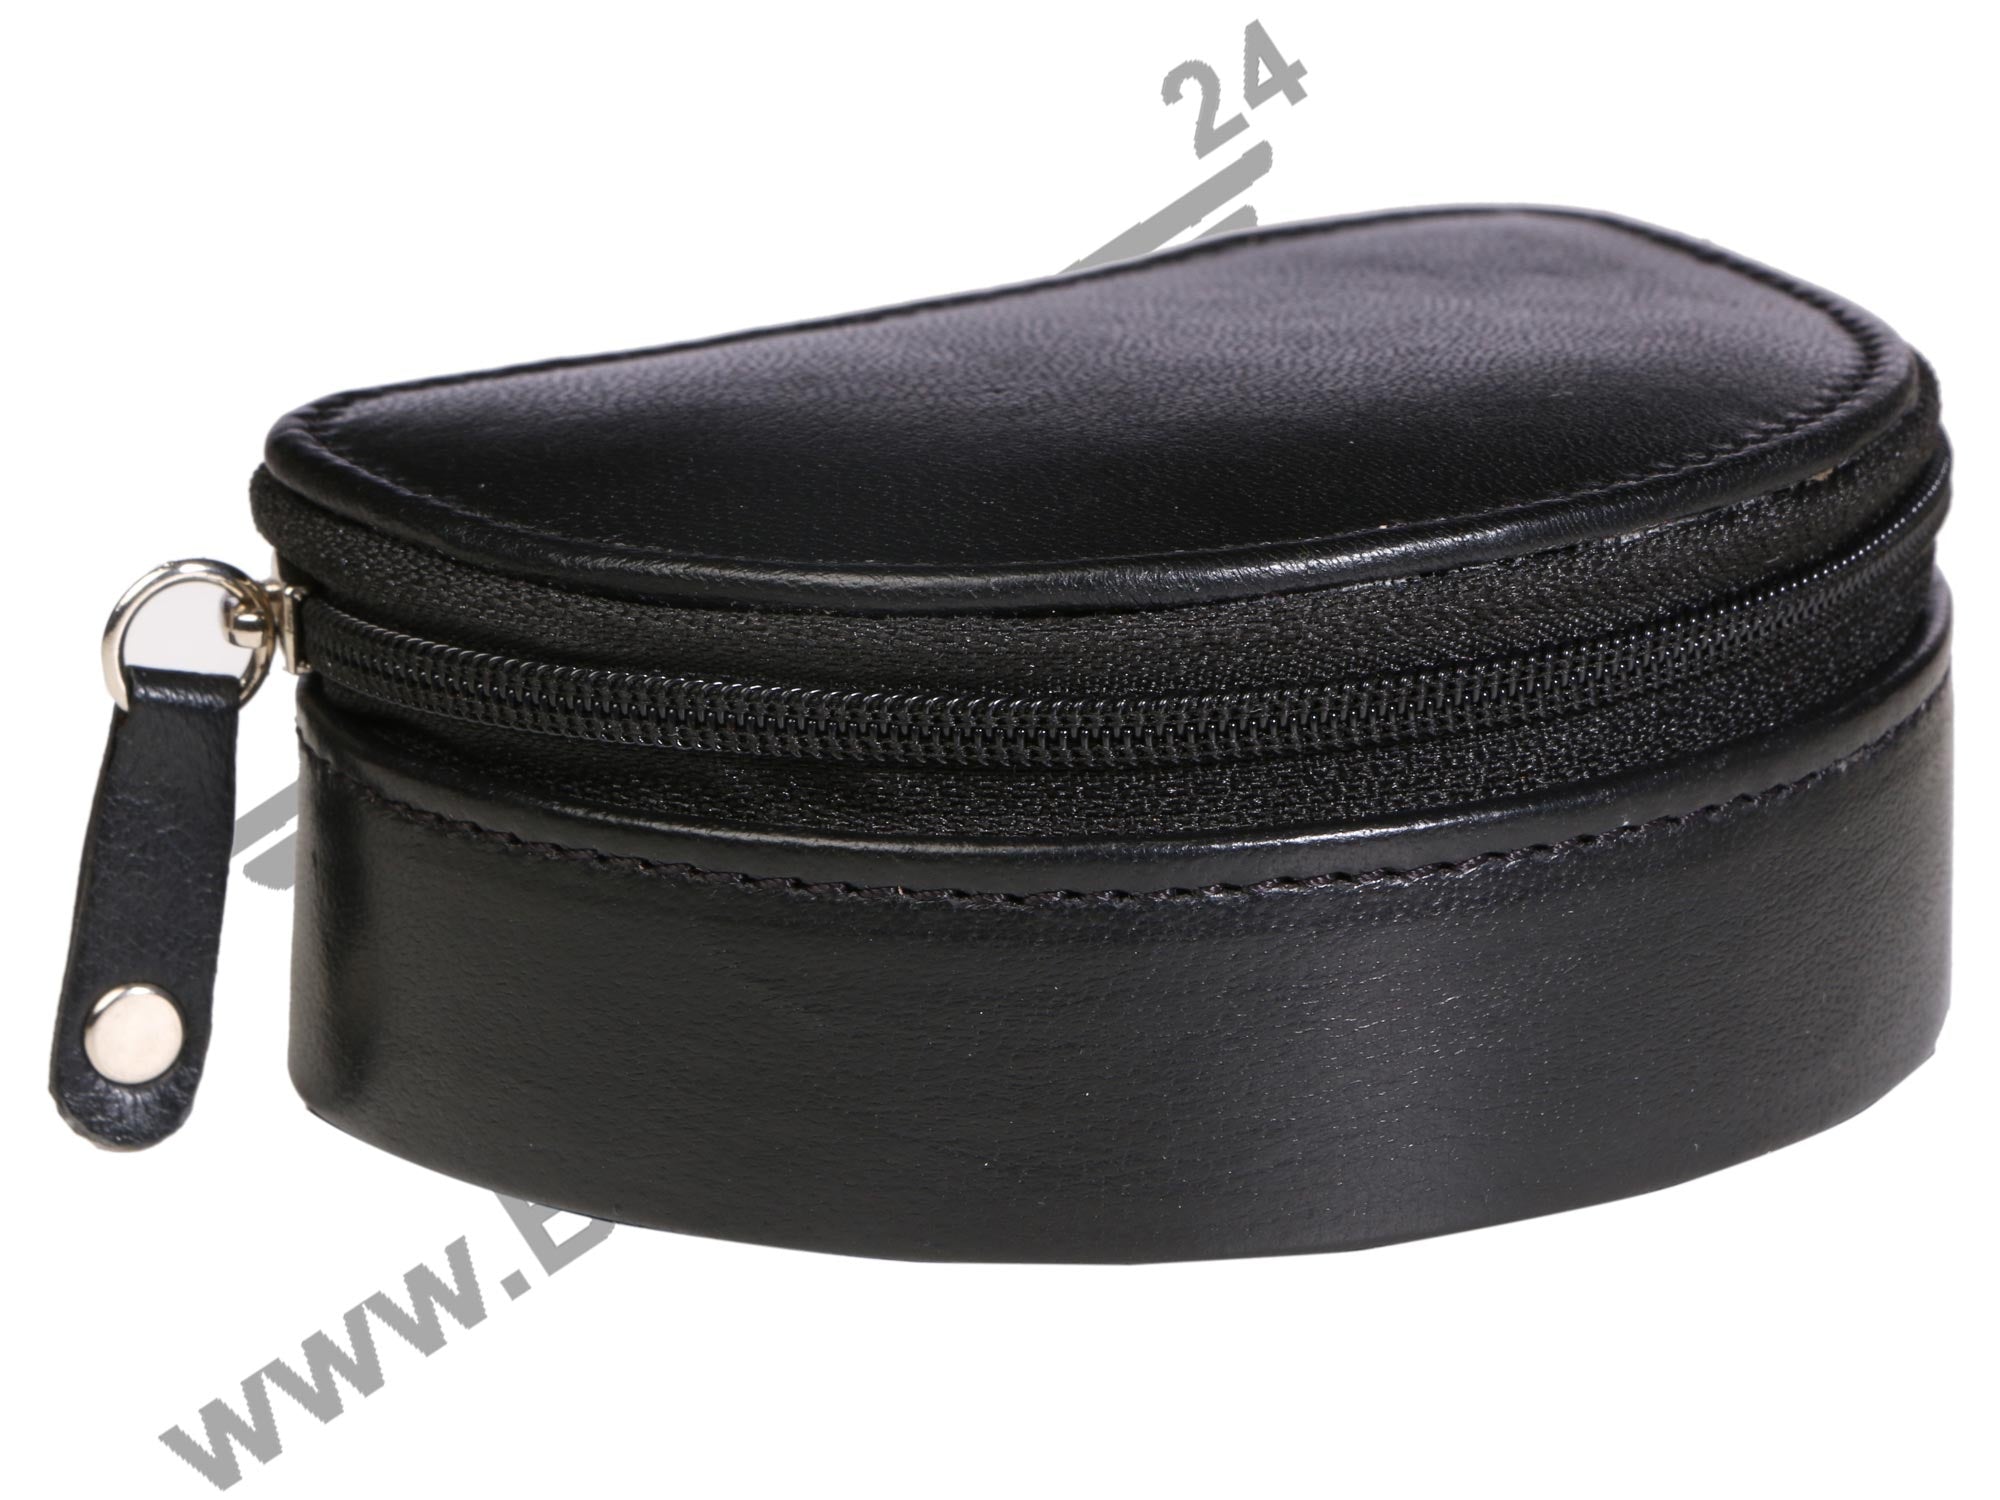 Side view of Black elegant TRAVEL SMALL JEWELERY CASE. It is hemi circle in shape. It is elegant and zipped.